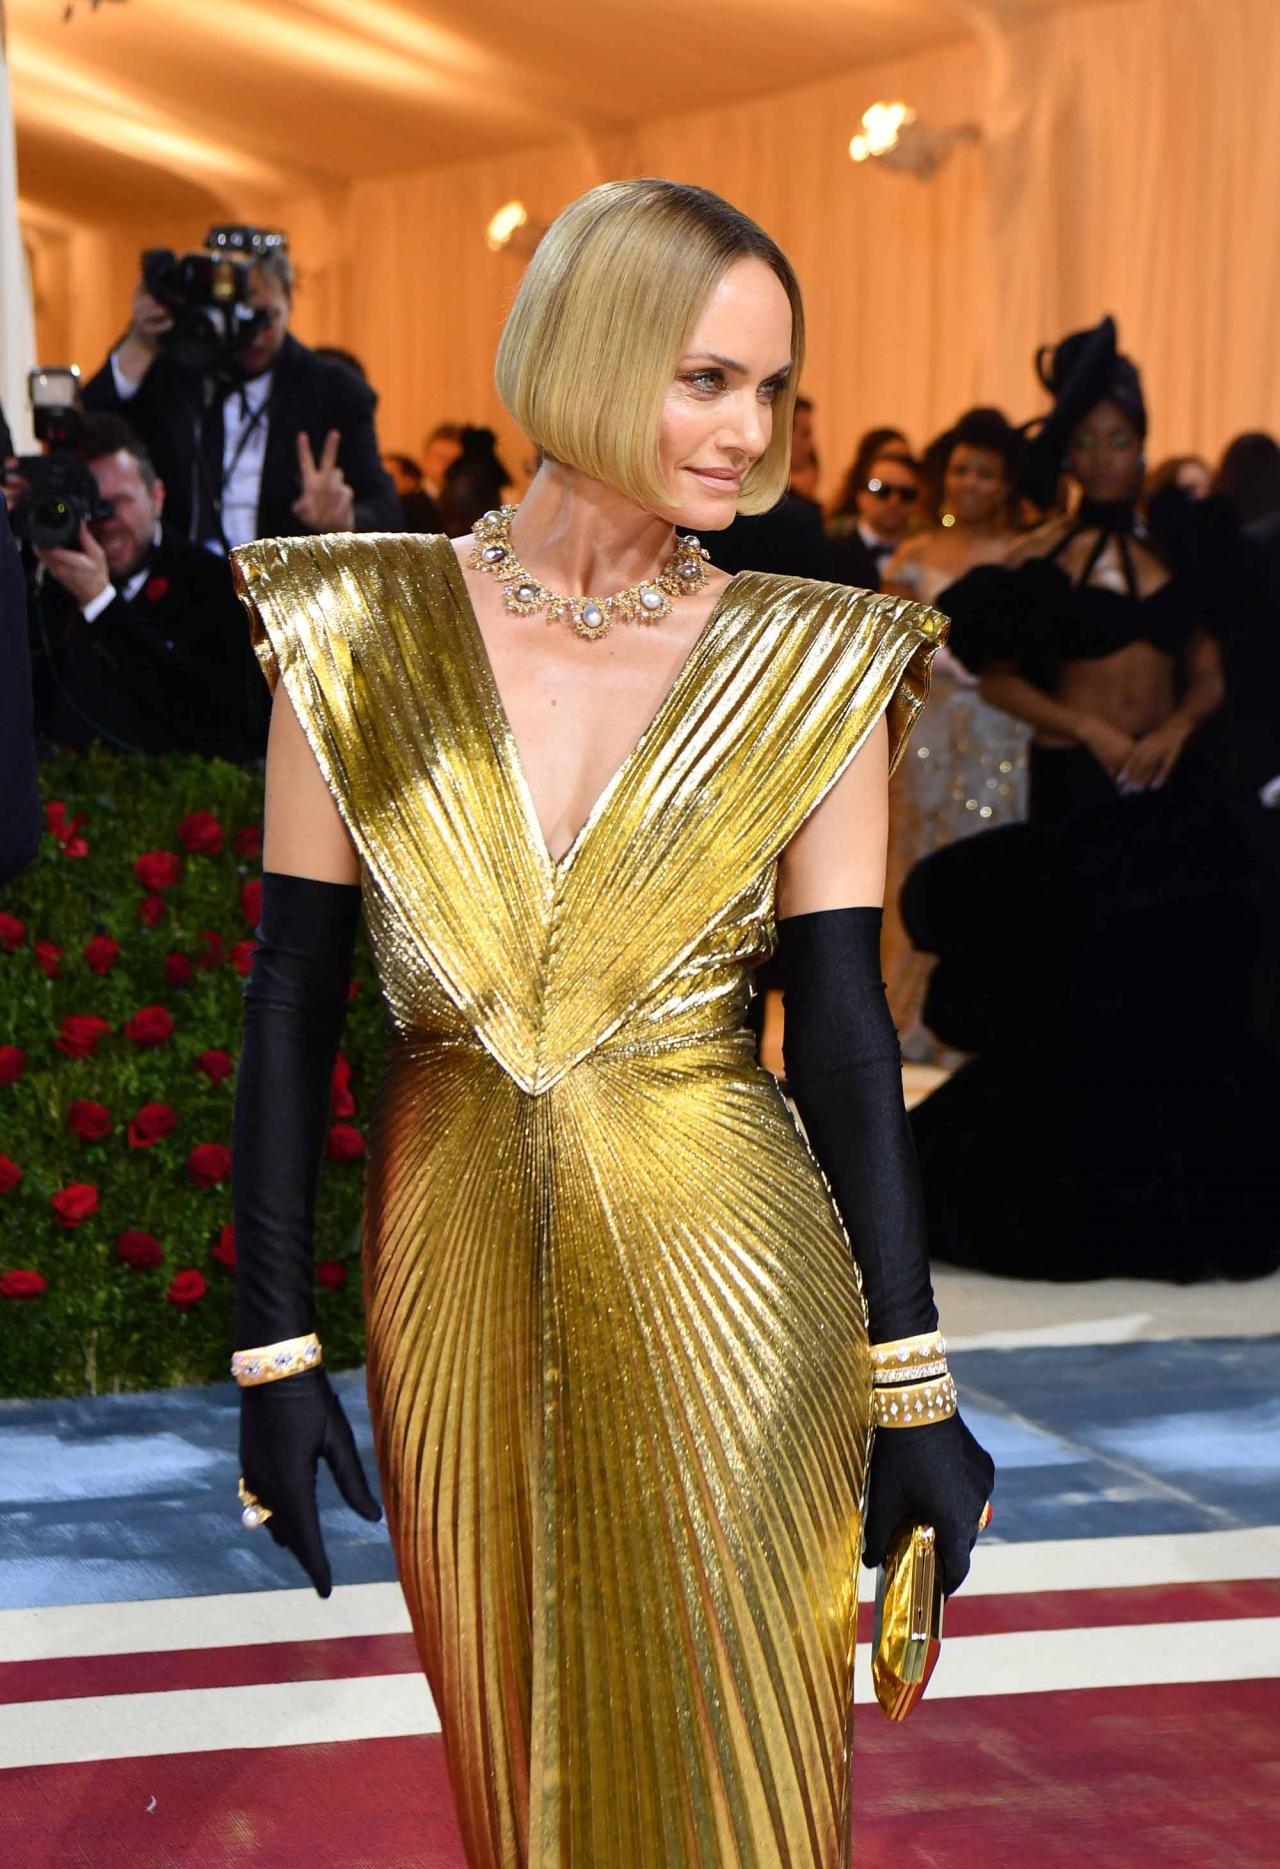 US model Amber Valletta arrives for the 2022 Met Gala at the Metropolitan Museum of Art on May 2, 2022, in New York. - The Gala raises money for the Metropolitan Museum of Art's Costume Institute. The Gala's 2022 theme is "In America: An Anthology of Fashion". (Photo by ANGELA  WEISS / AFP)